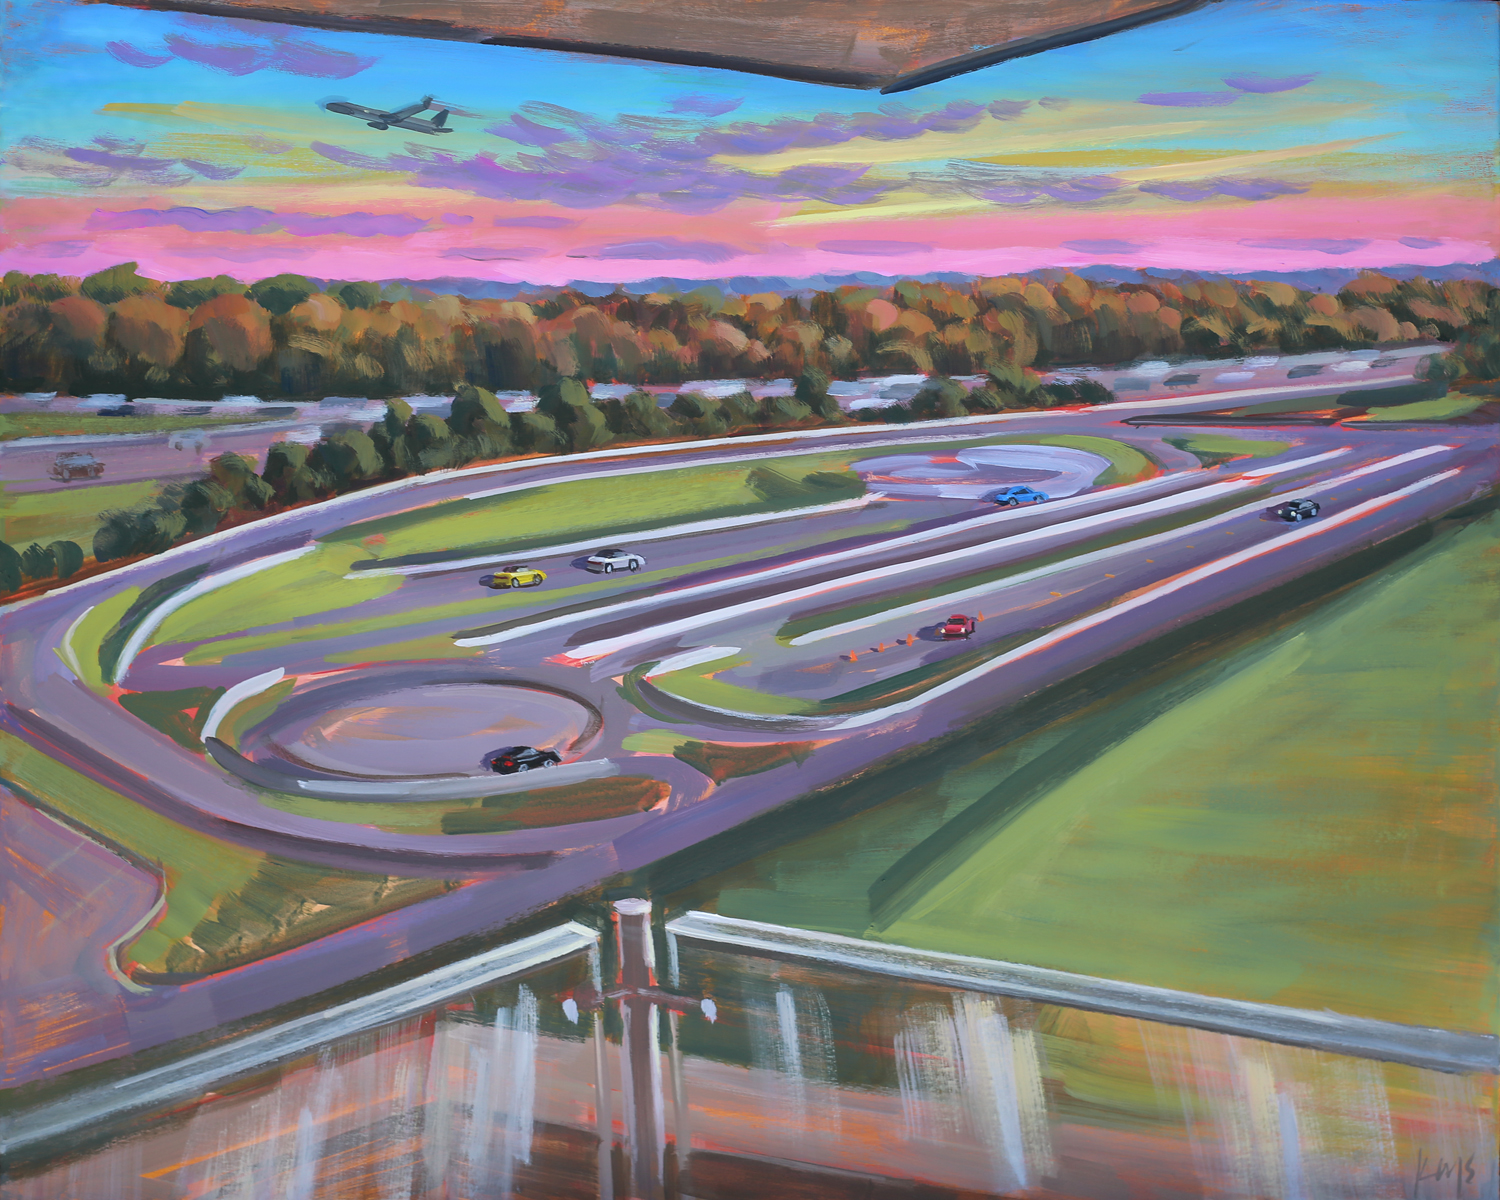 Live Event Painter, Ben Keys, captured the balcony view of Overdrive Lounge overlooking the Porsche Experience Center during the Grand Opening event of Atlanta's newest Hotel, Solis Two Porsche Drive.